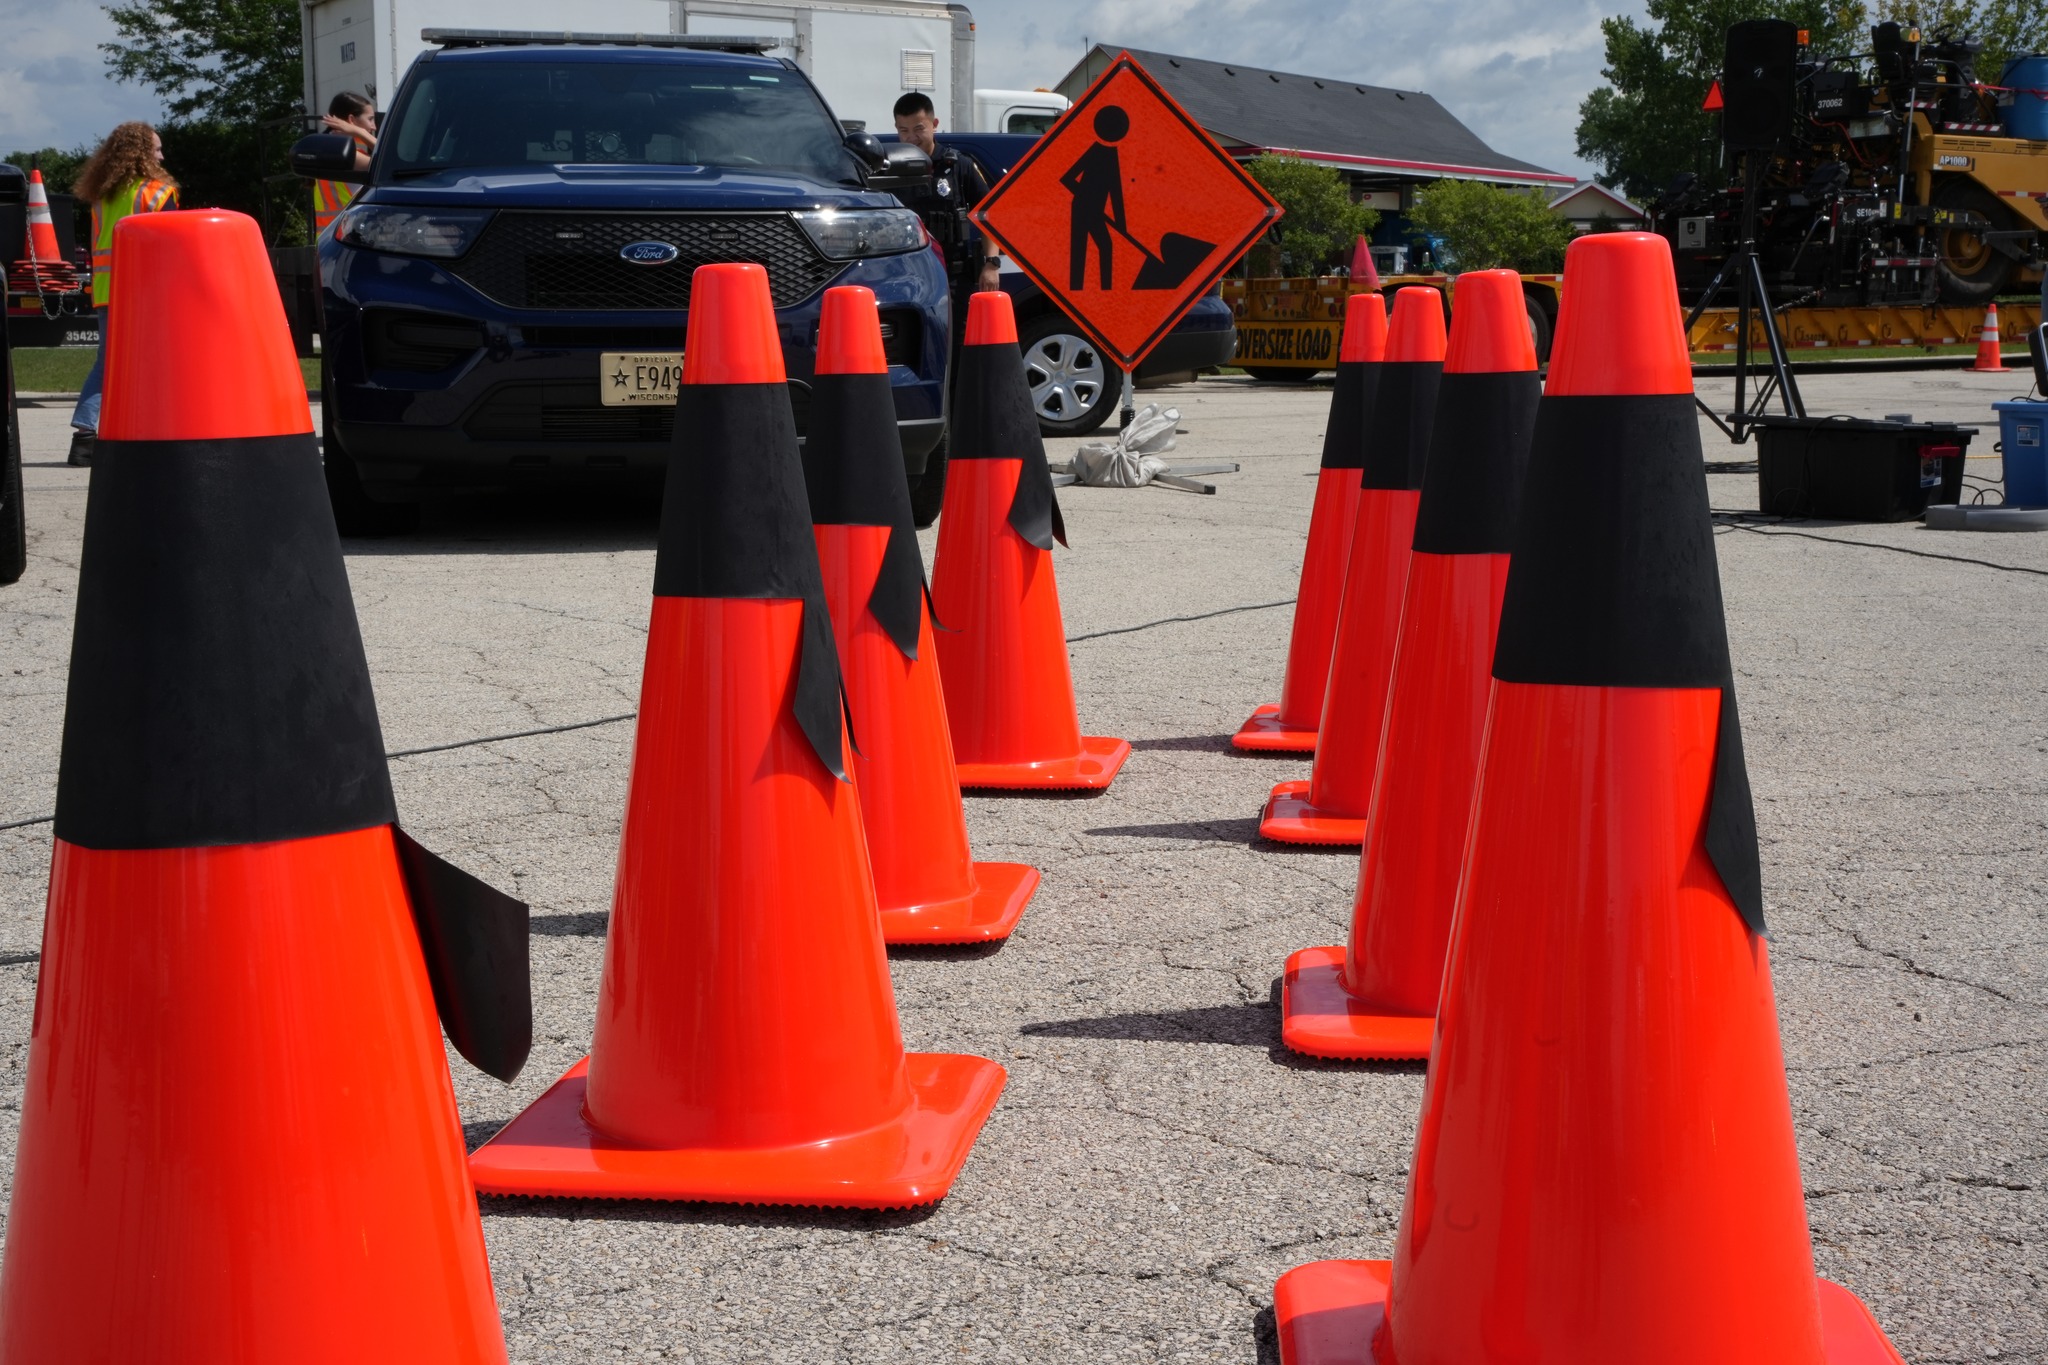 Wisconsin Work Zone and Move Over Safe